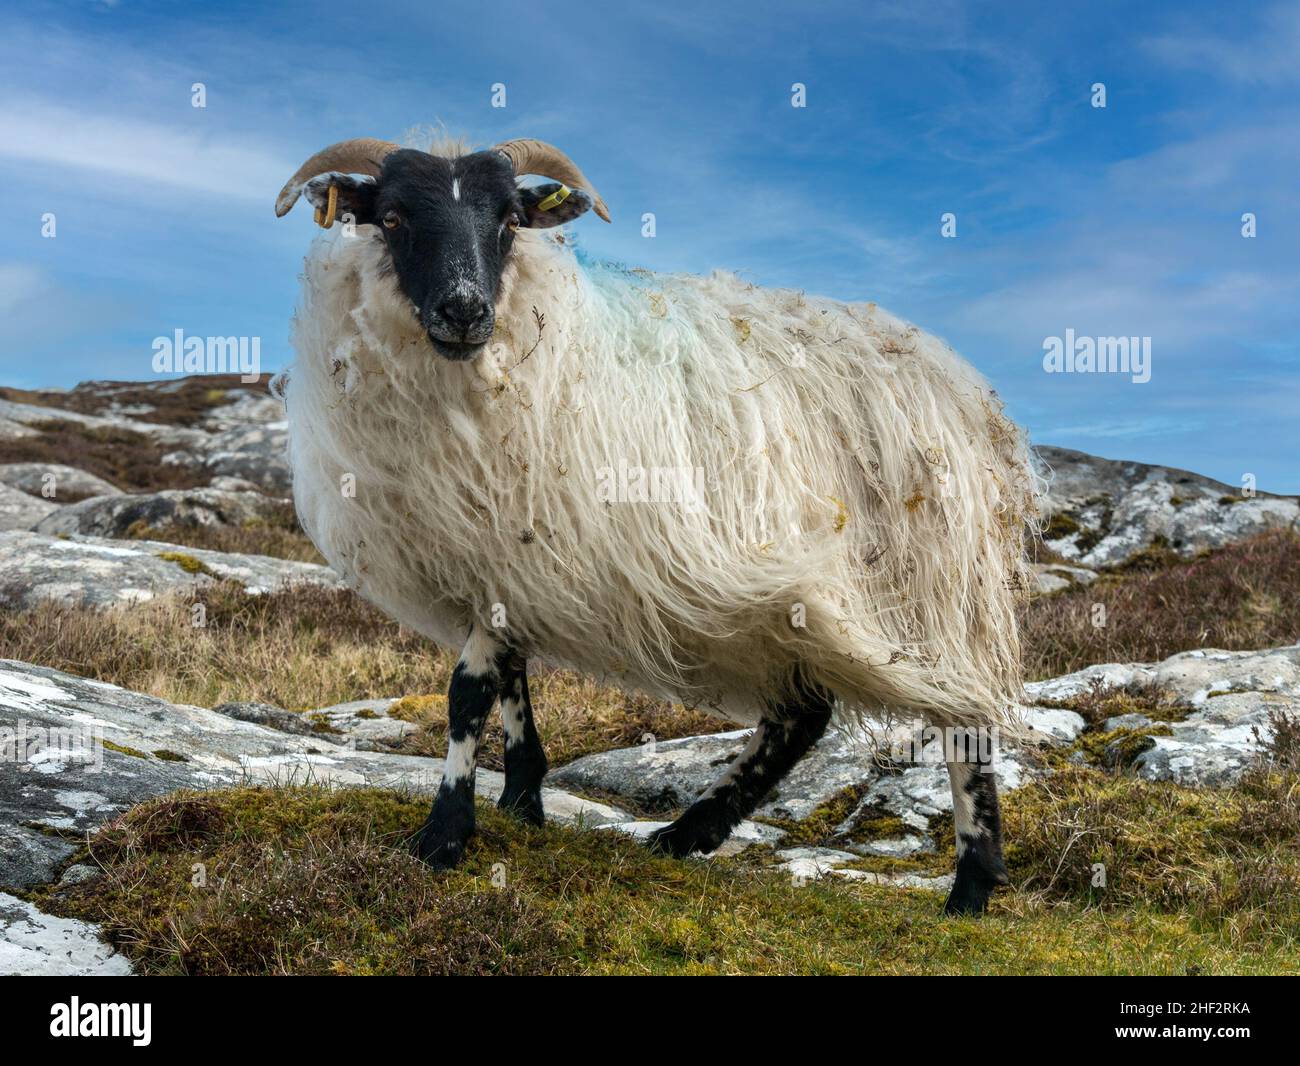 One Scottish sheep ewe with black face, horns and long, shaggy white woolly fleece standing on rocky hillside, Isle of Lewis, Scotland, UK Stock Photo